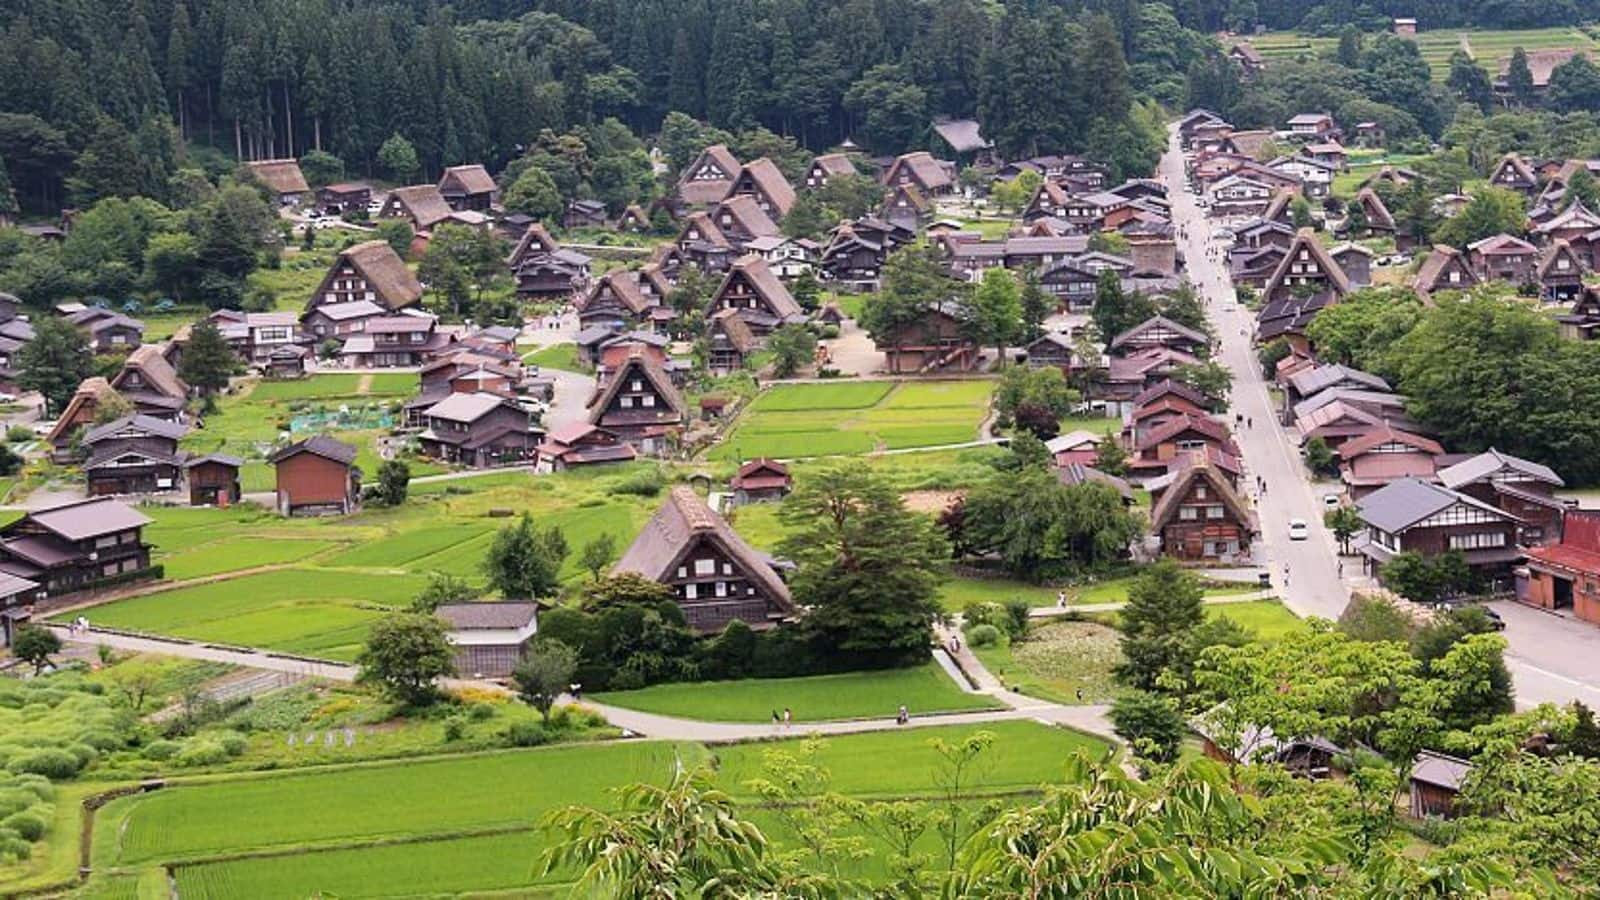 Step back in time to Shirakawa-go, Japan with this guide